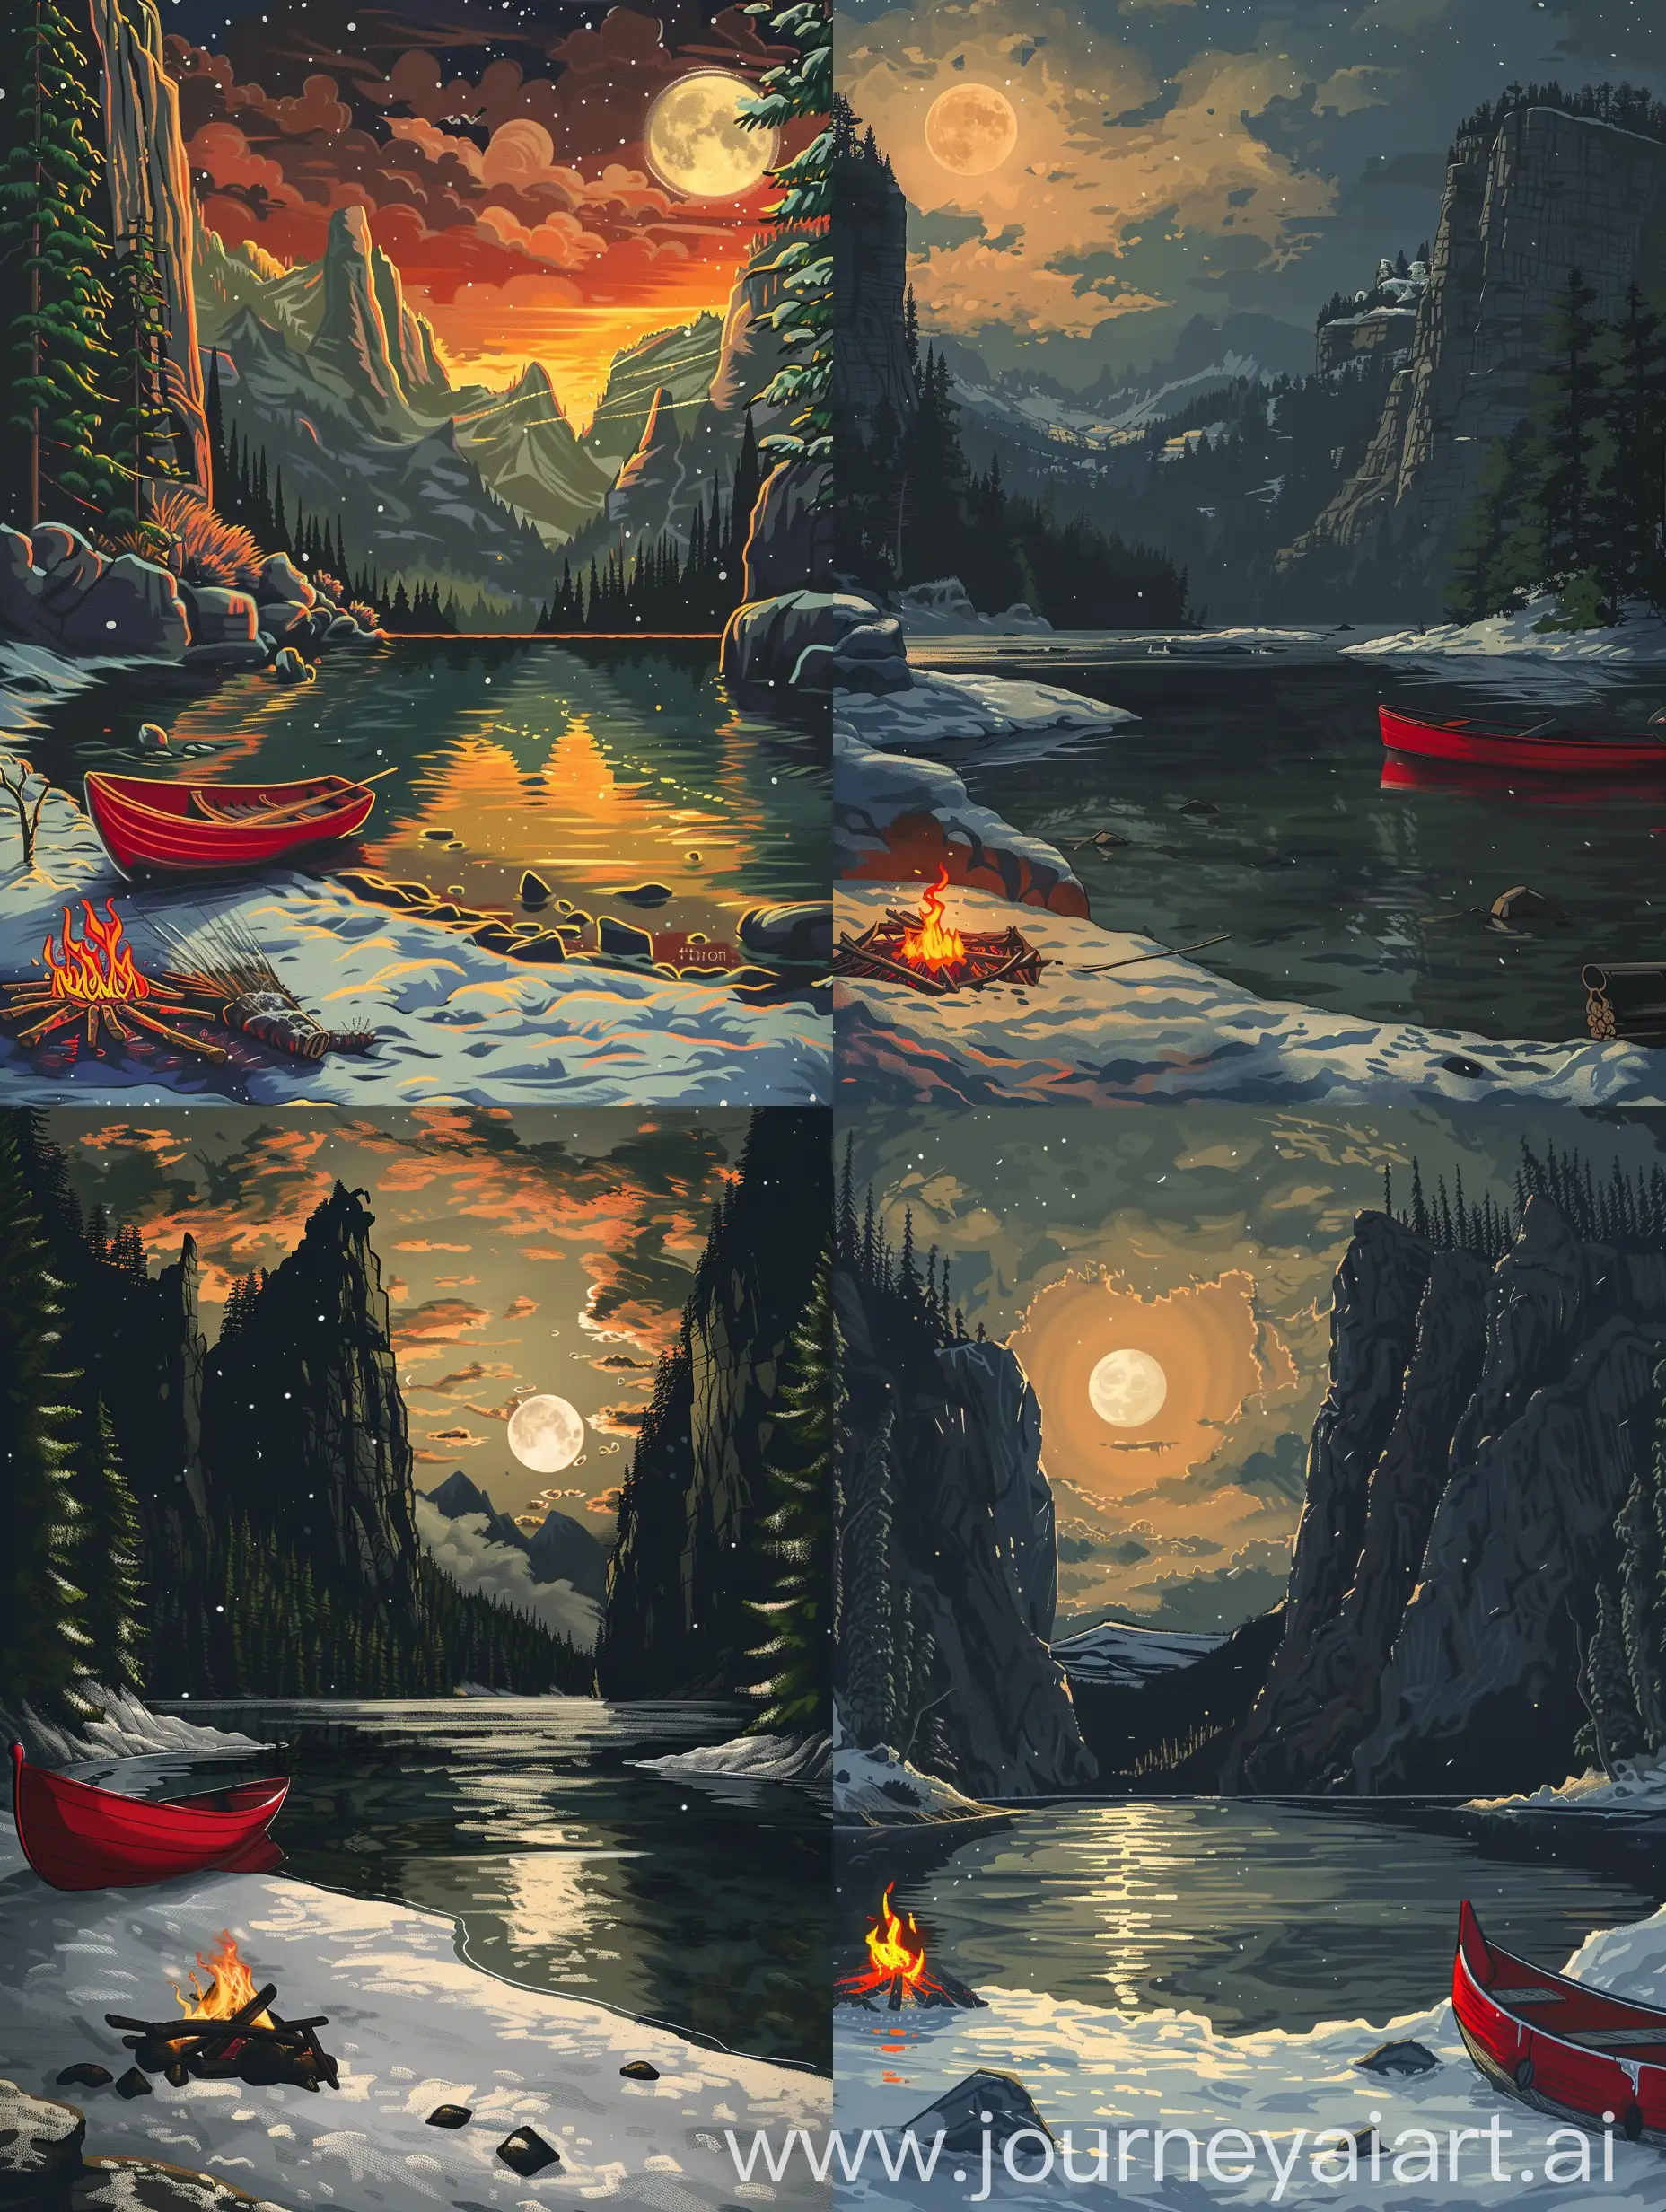 Digital drawing A night-time scene in nature. The setting features a red  boat near the shore of a calm lake.Snow in shore of the lake. The lake is surrounded by towering mountains and dense forests. The moon illuminates the dramatic sky with orange light . A camfire nearby boat in shore. Anime style